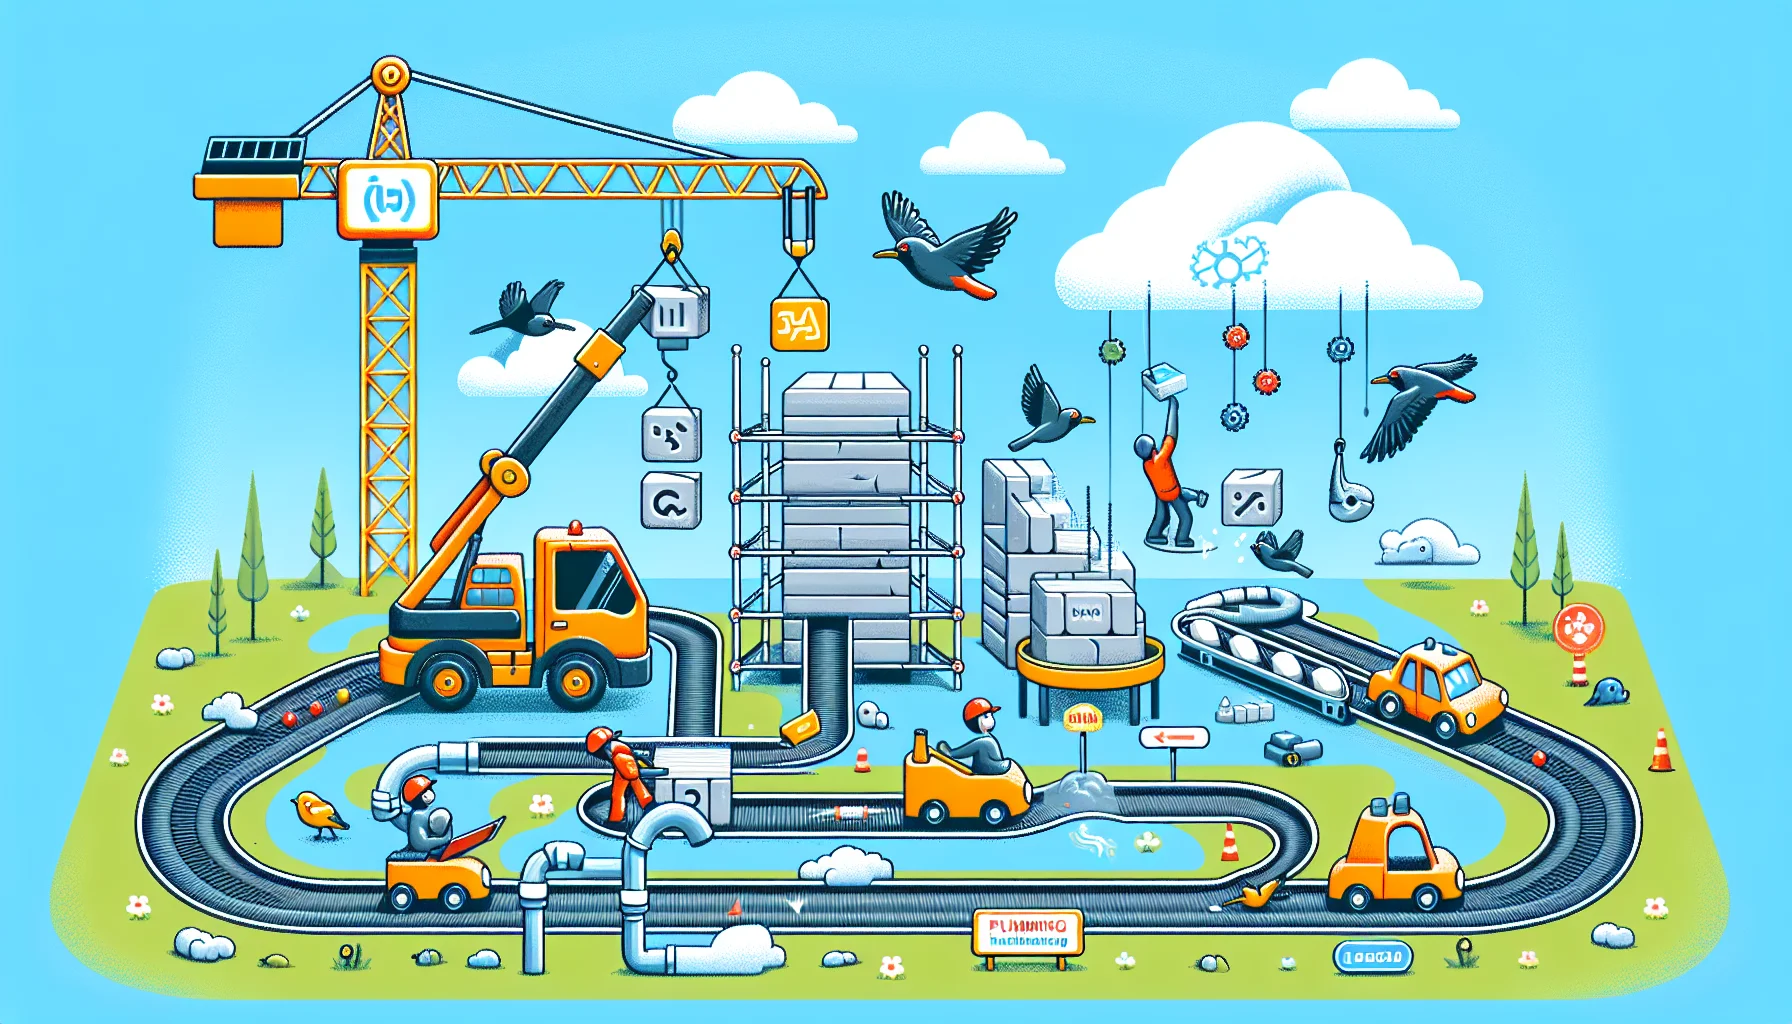 Create a humorous image depicting a website building process. It's set in a visual metaphor of a construction site where construction tools symbolize web development tools and plumbing system represents the hosting infrastructure. As part of the funny scenario, imagine a crane swinging and lifting block-shaped plugins, a conveyor belt rolling out streams of code, and birds (symbolizing bugs) flying around that workers are chasing. Set this scenario in an enticing and light-hearted manner to represent the appealing process of web hosting.